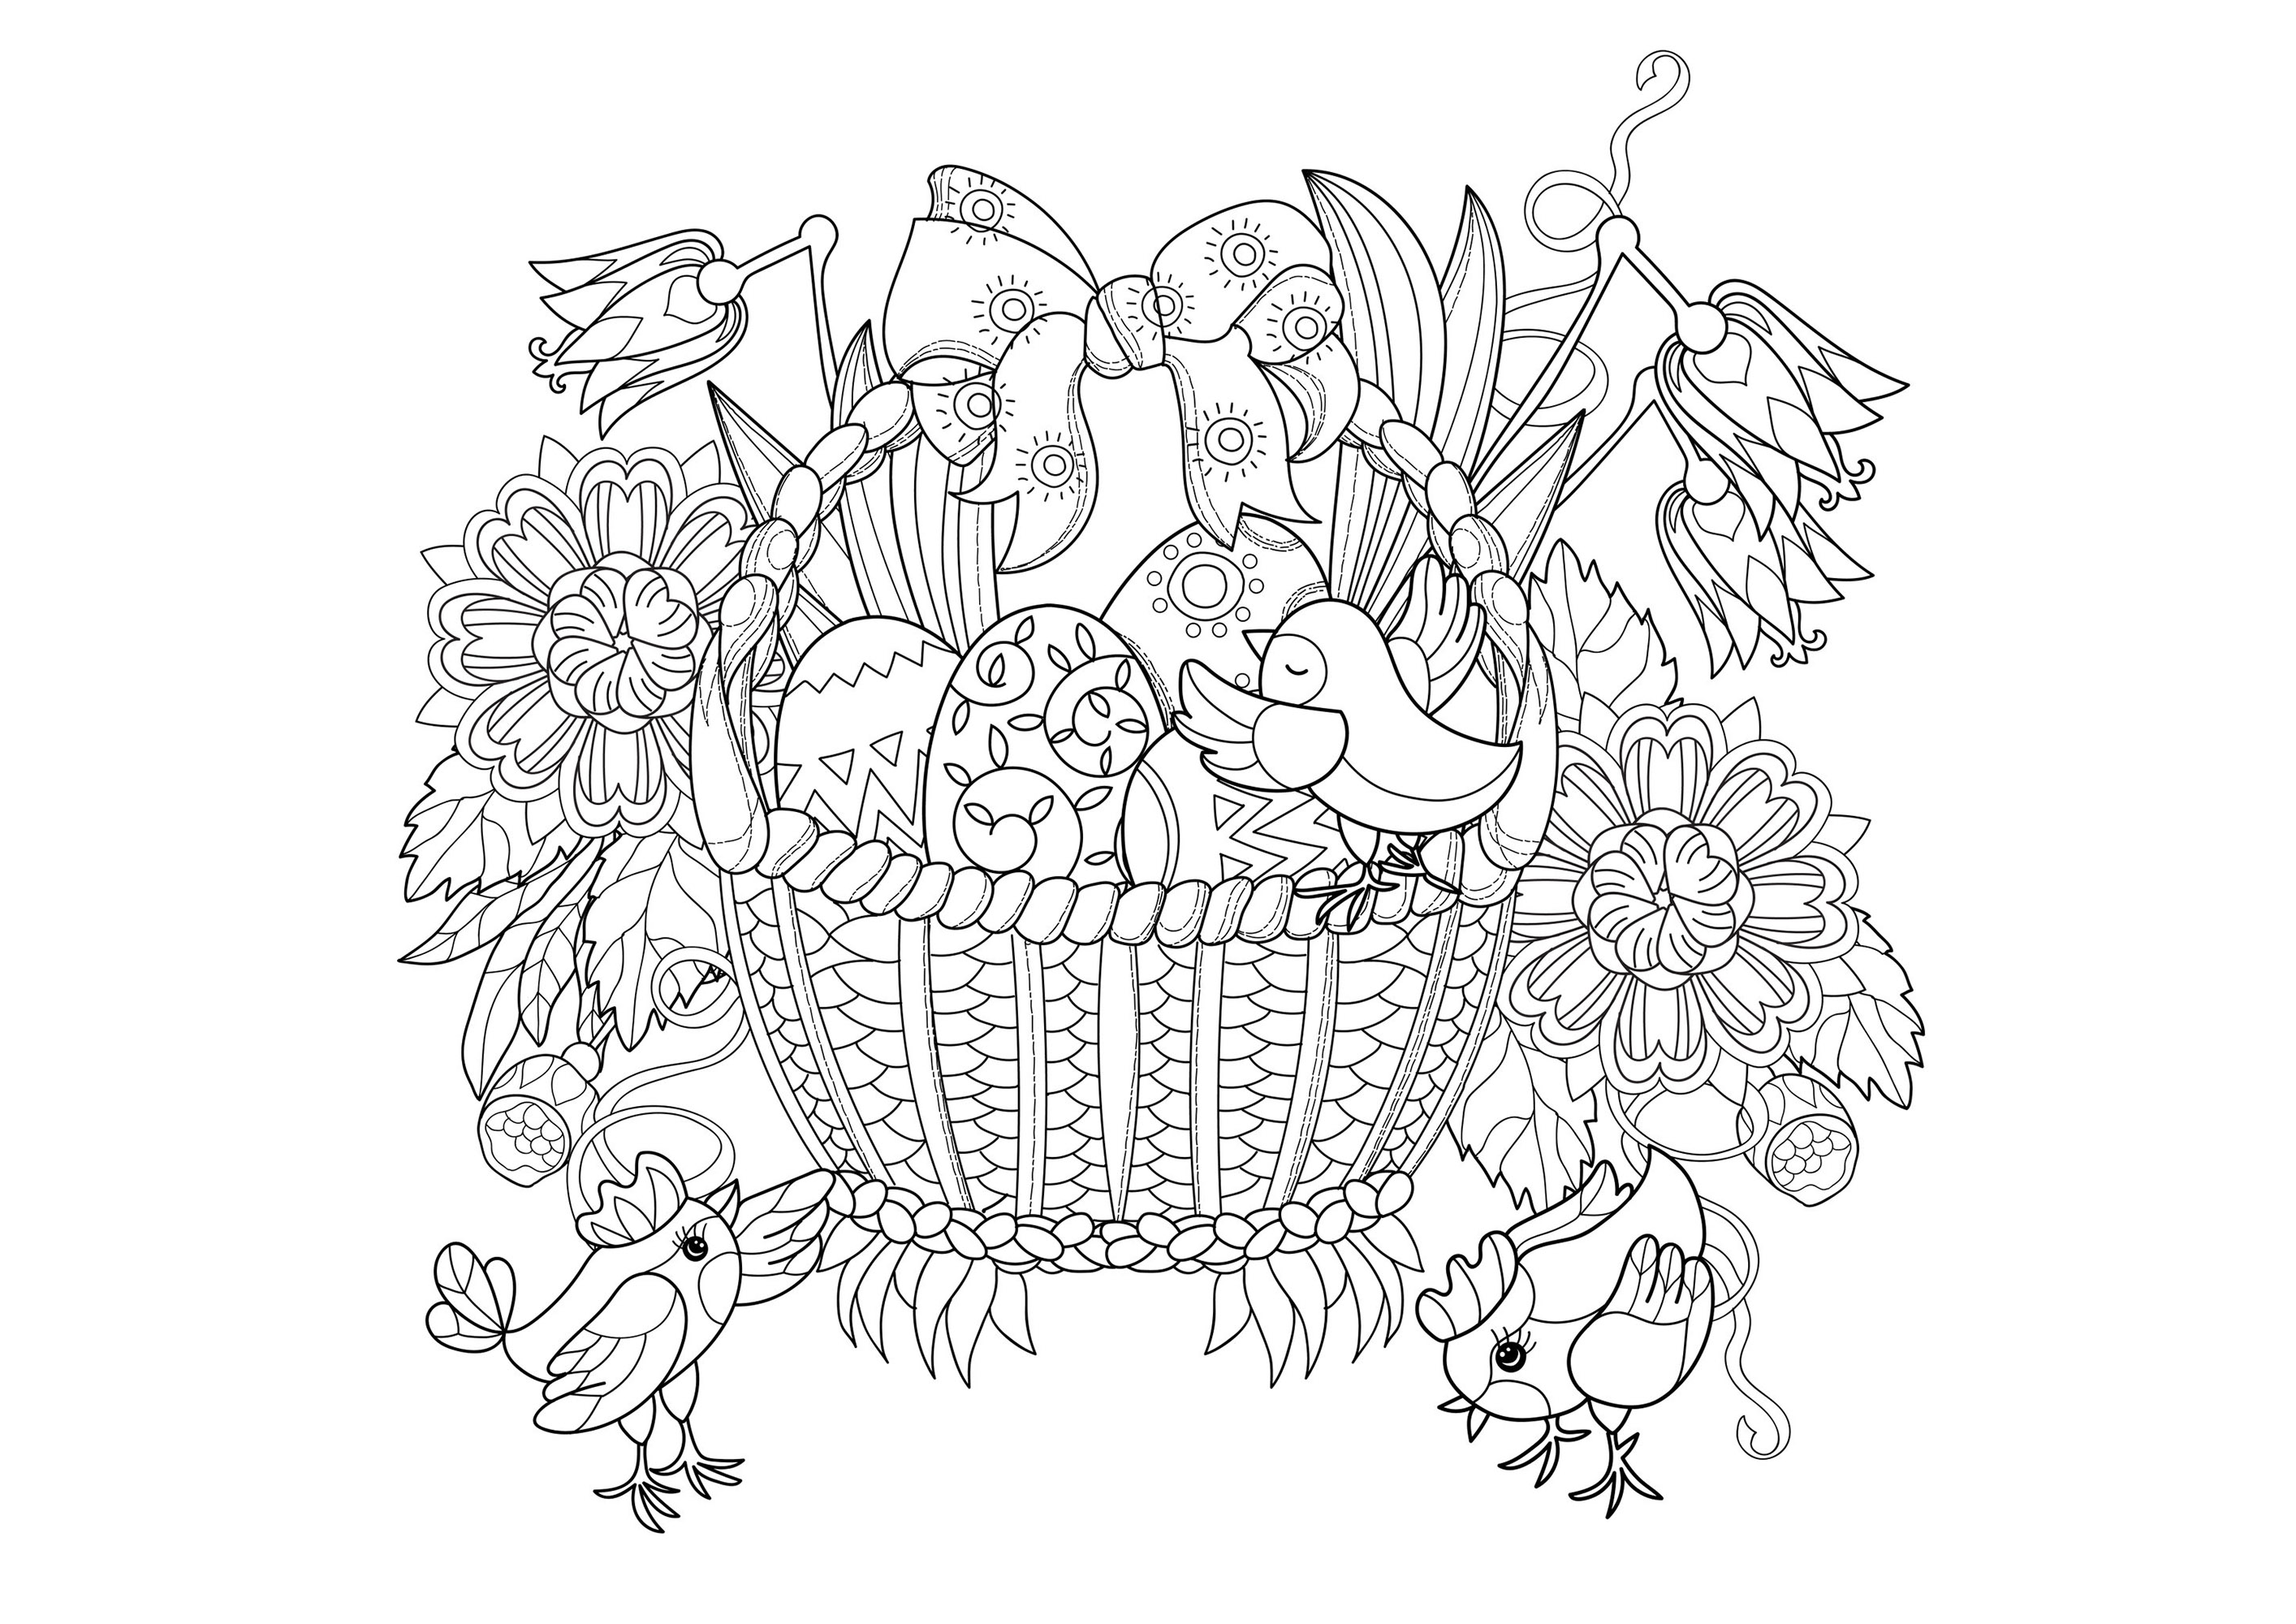 Cute coloring page (but cpmplex) of a wicker basket with easter eggs and little birds, Artist : Yazzik   Source : 123rf